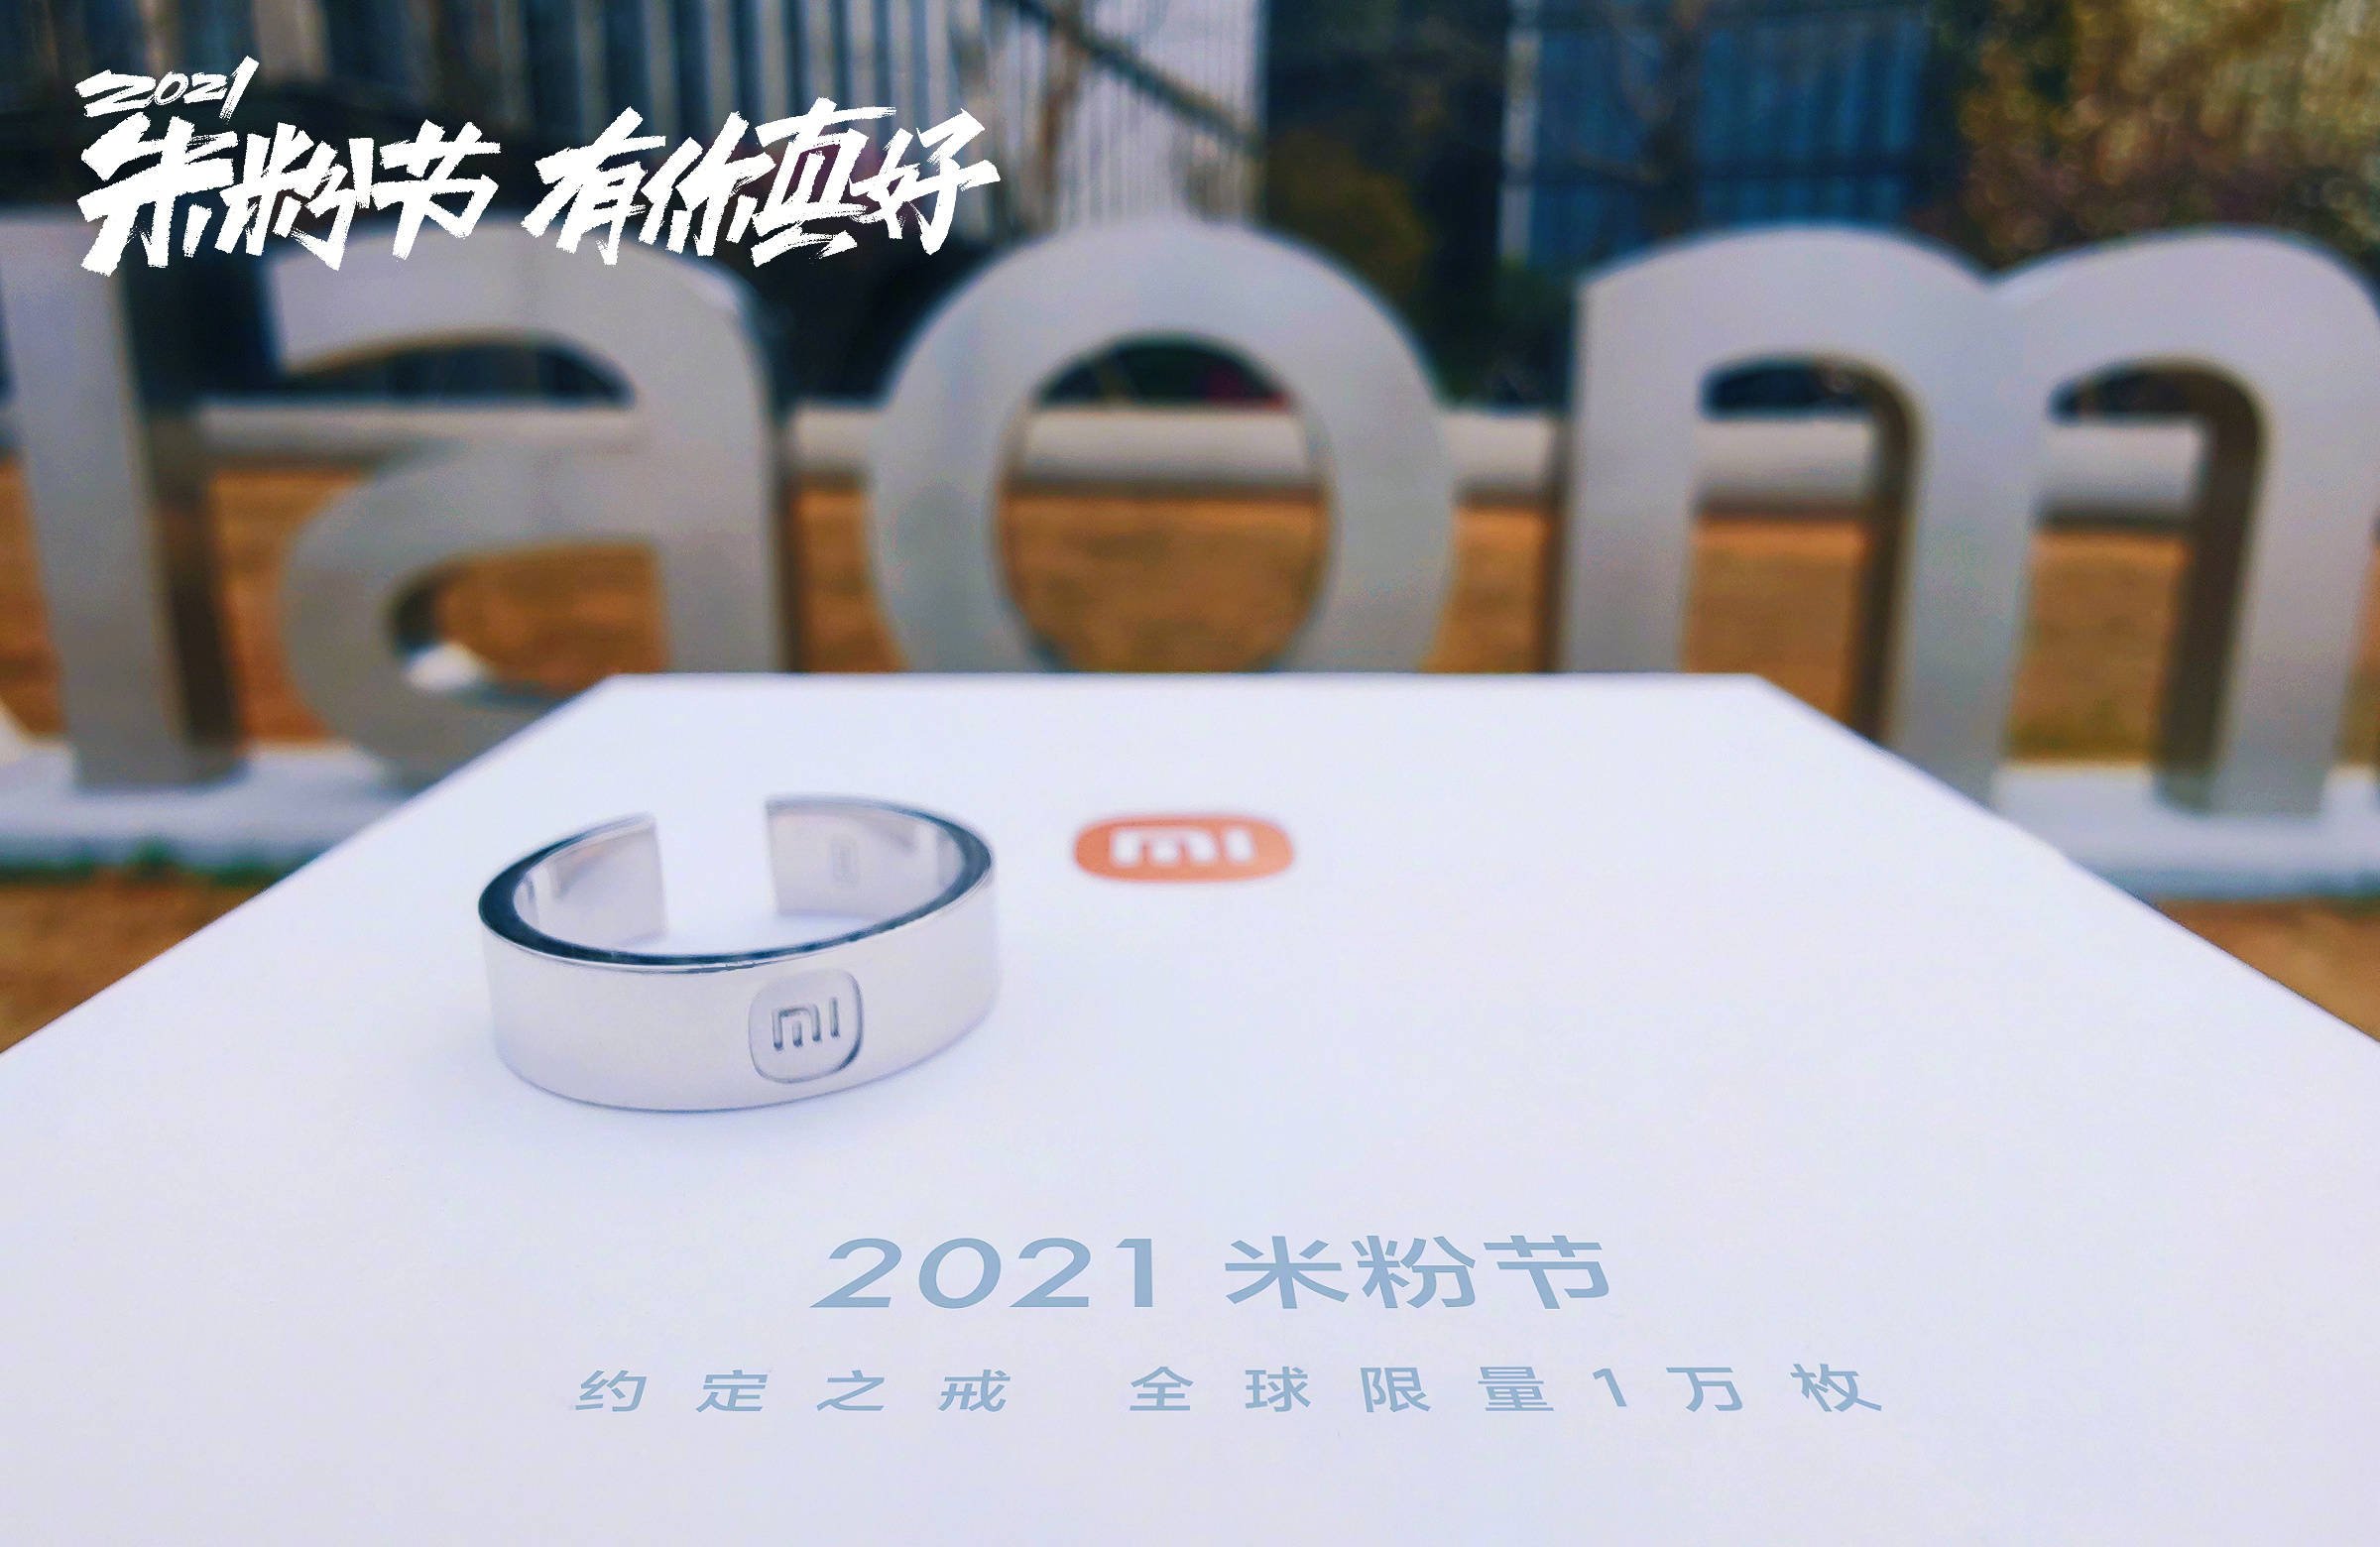 Xiaomi introduced a limited edition ring during the Mi Fan Festival 2021